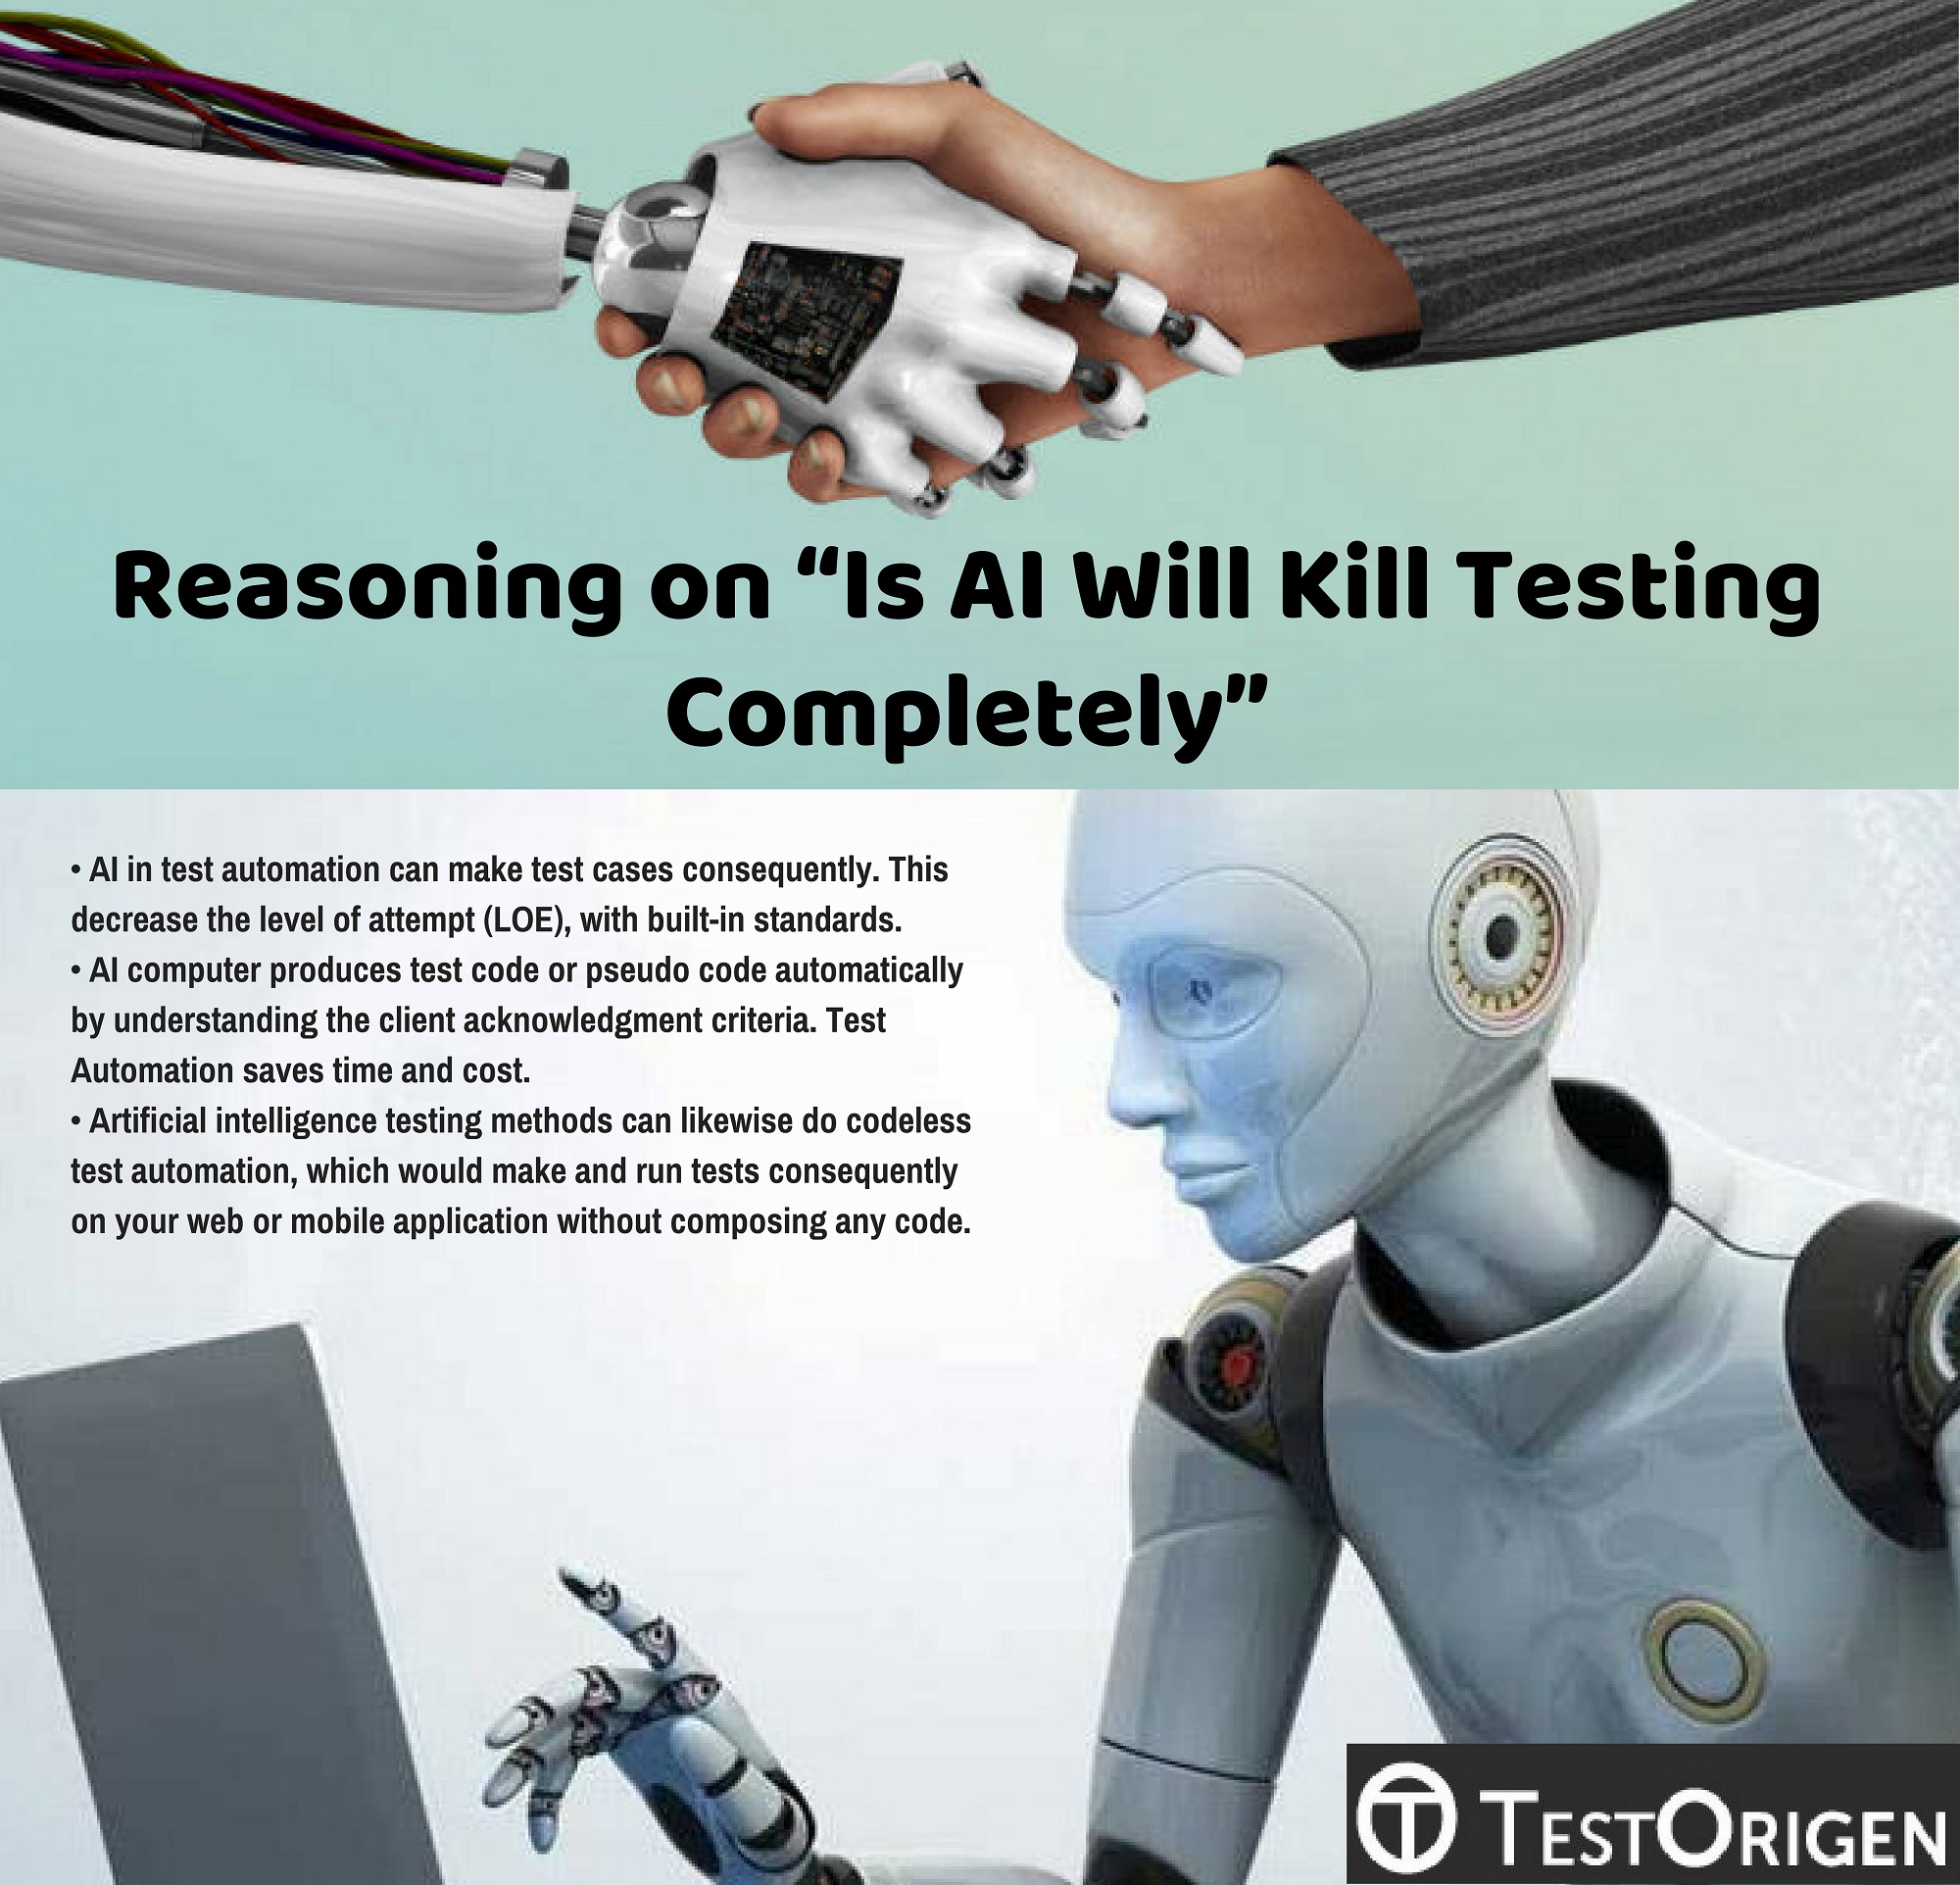 Reasoning on “Is AI Will Kill Testing Completely”